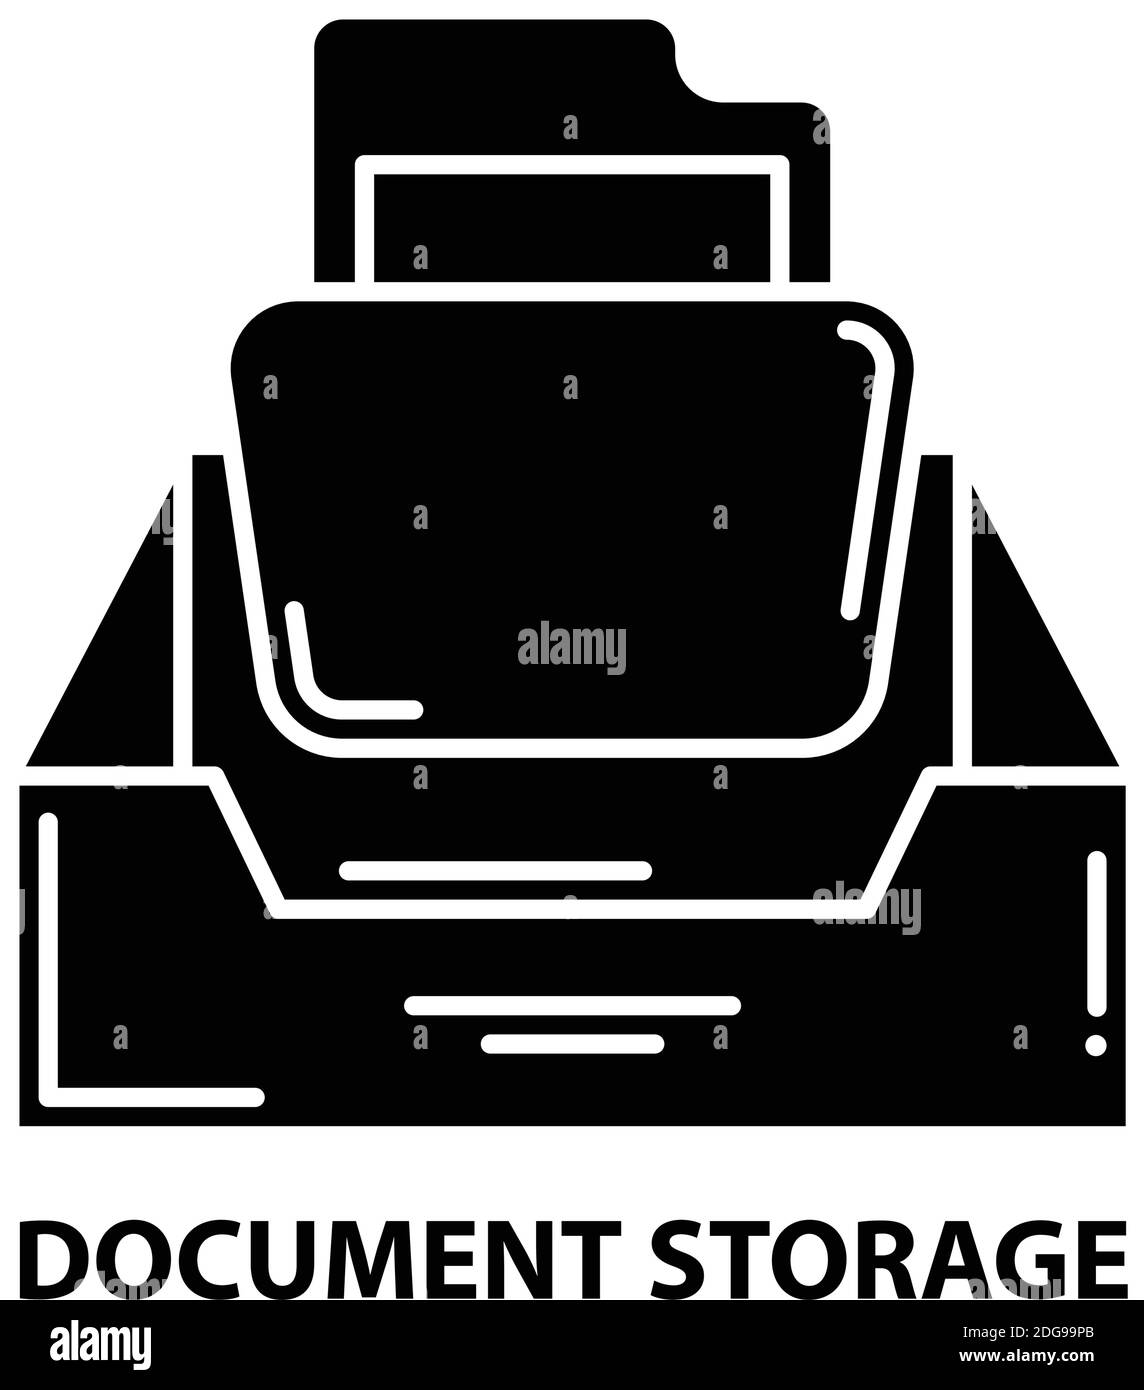 document storage icon, black vector sign with editable strokes, concept illustration Stock Vector